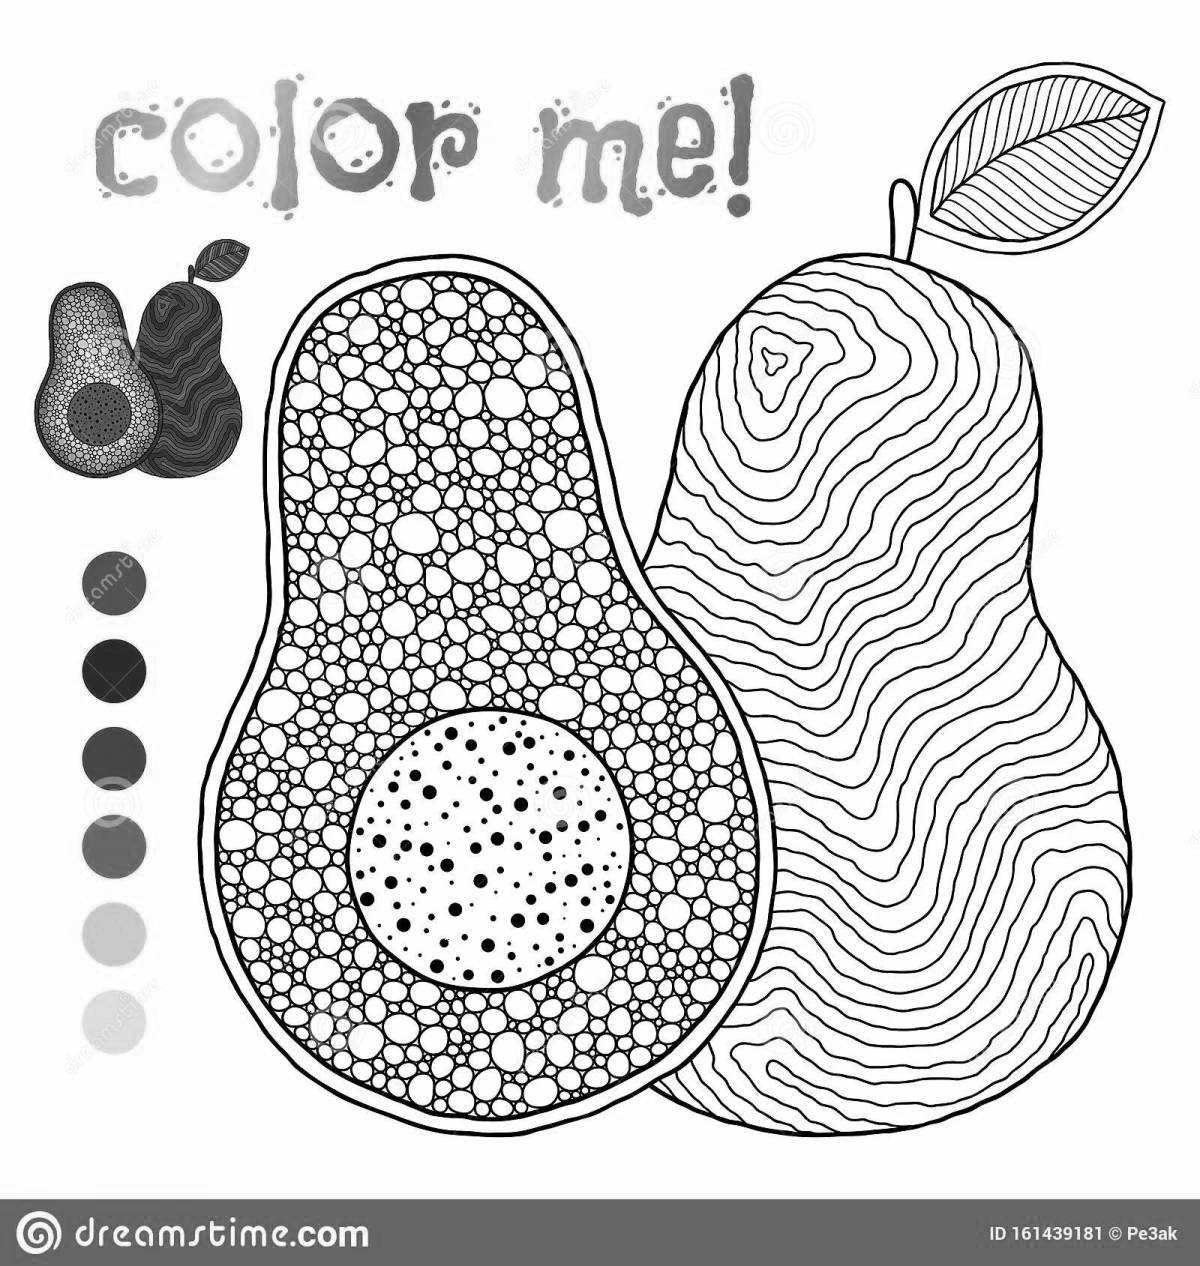 Relaxing avocado coloring page